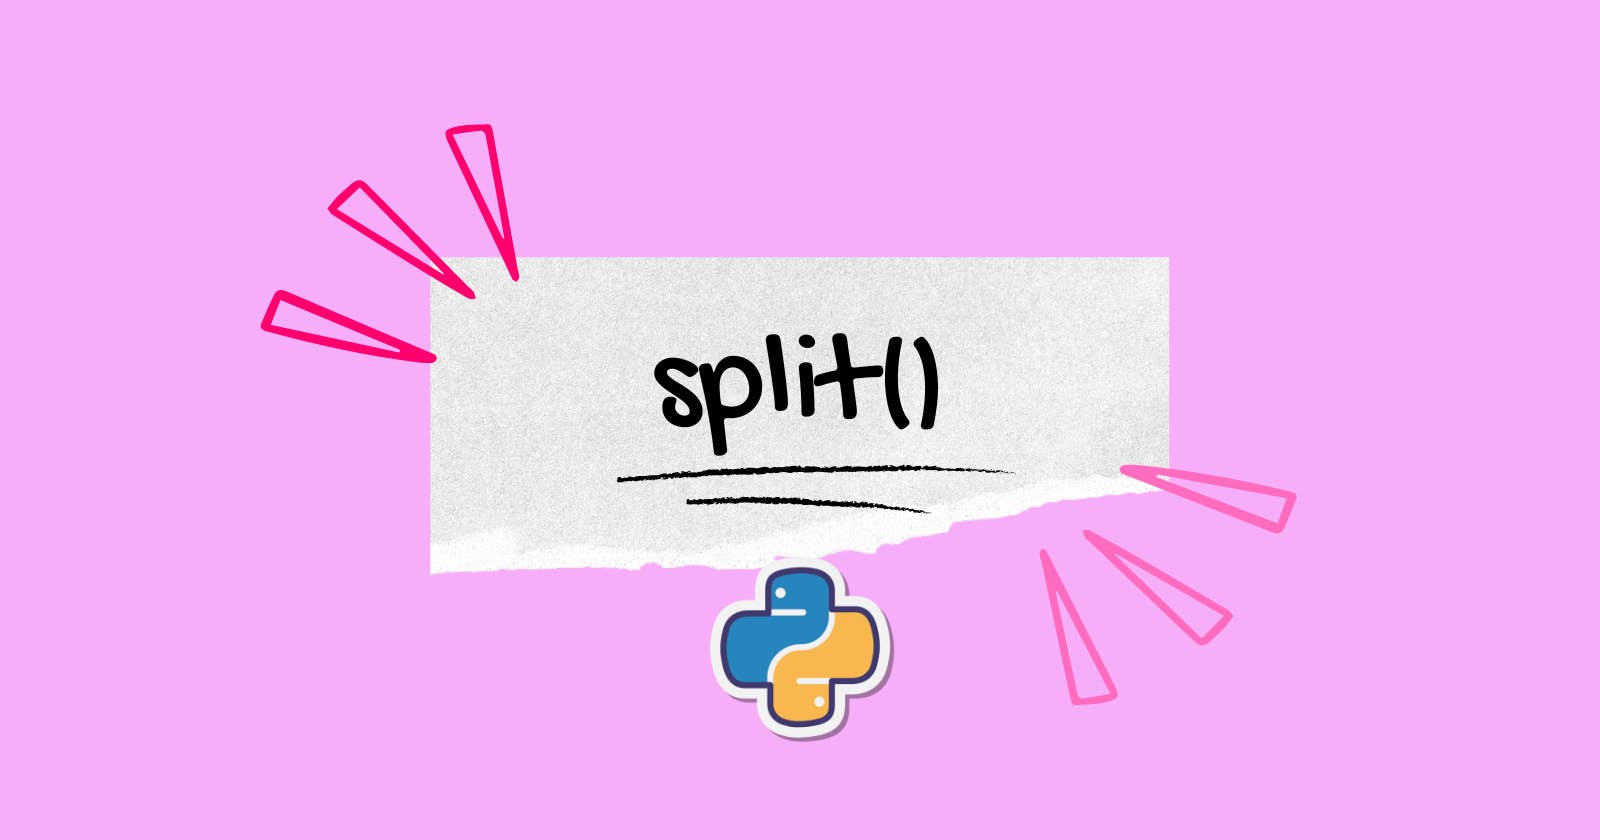 How to Use split() Method in Python